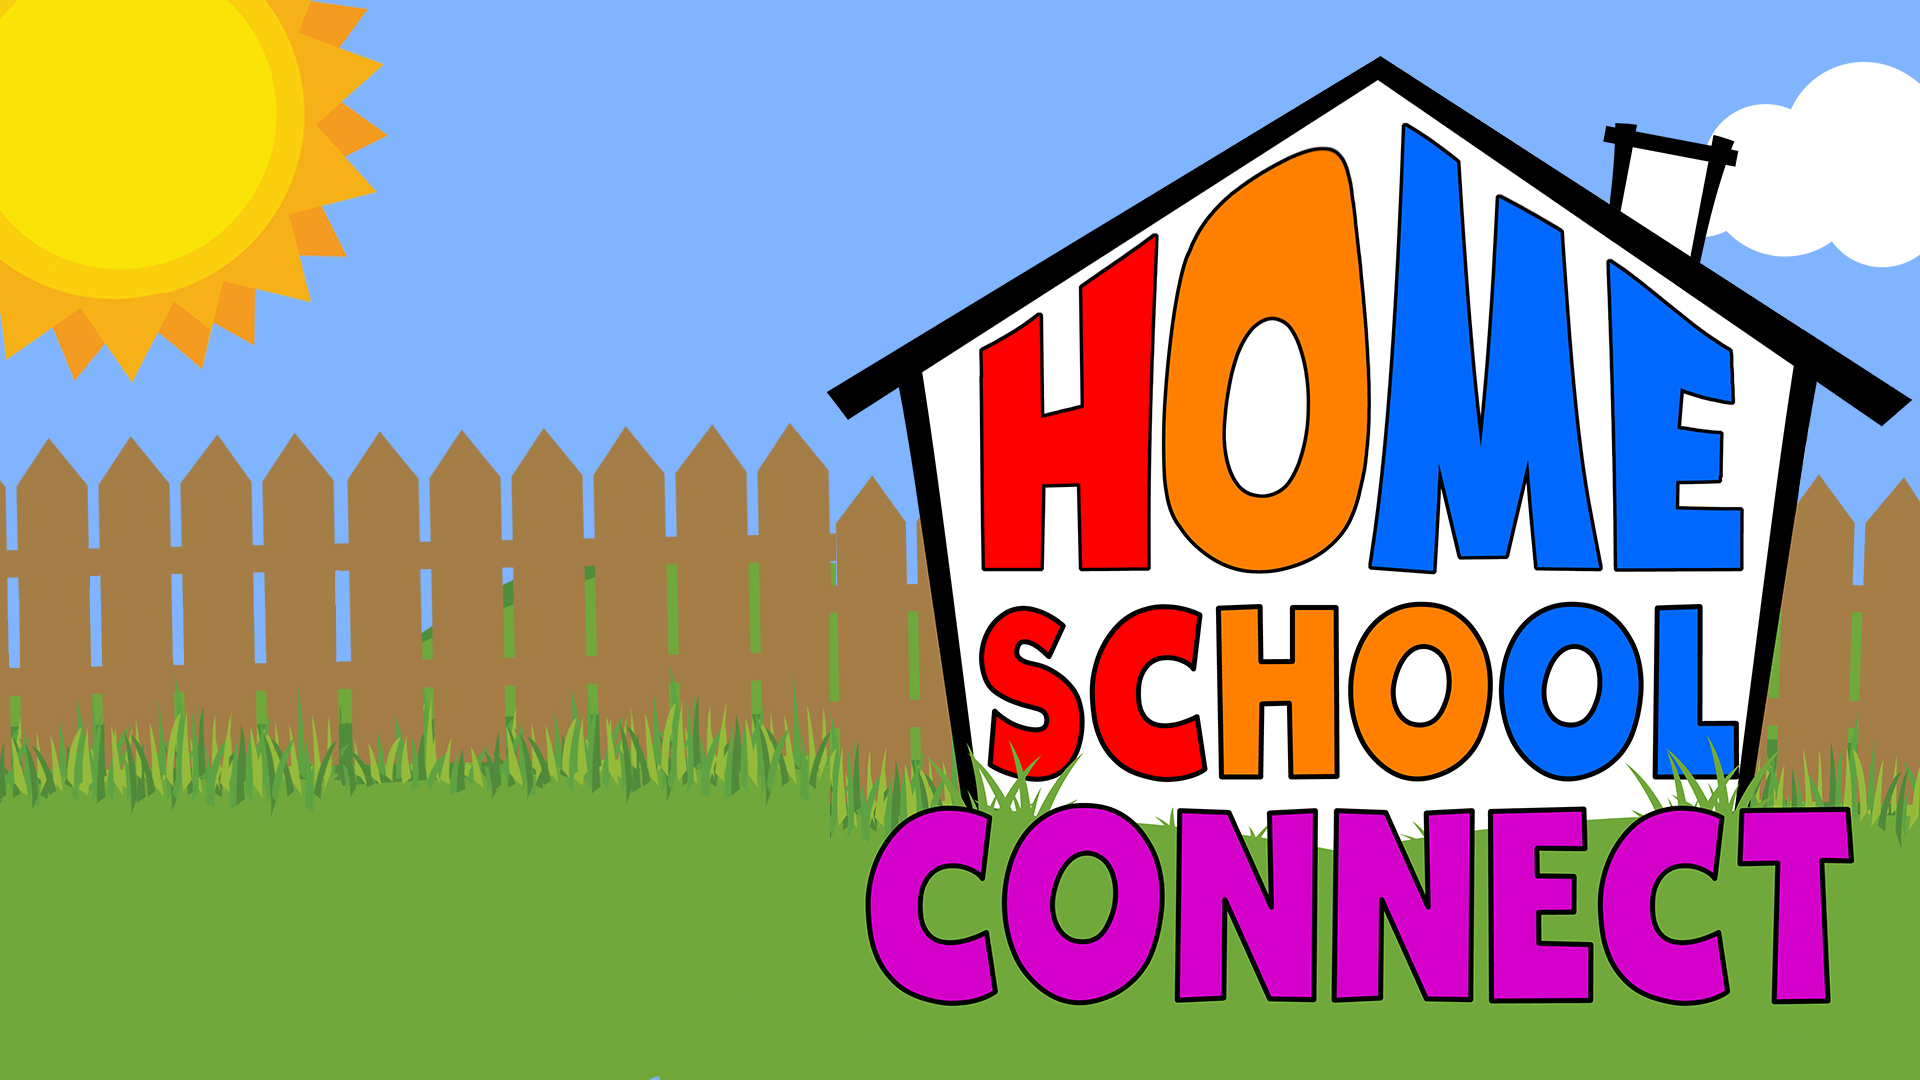 Image reads "Home School Connect" inside of a house outline. The background is a yard scene with grass, the sky, a fence, and the sun in the left corner.